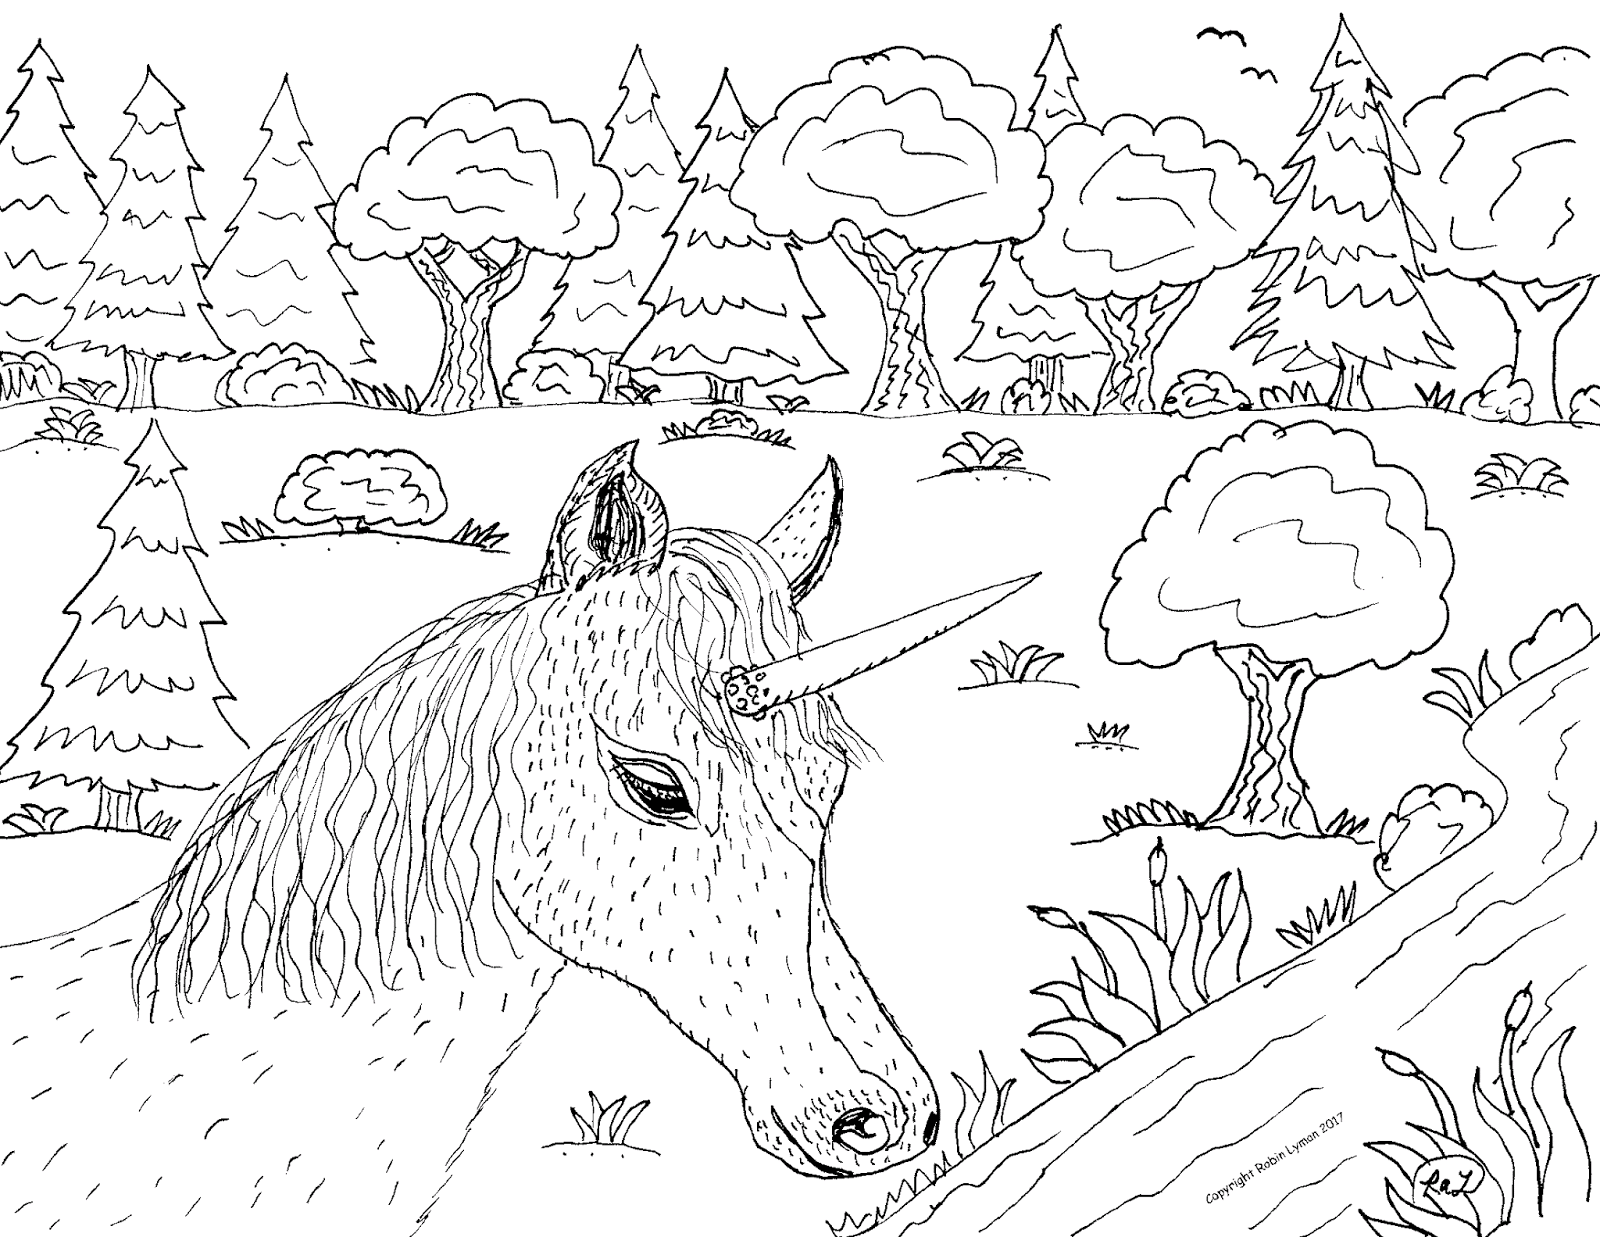 Robin's Great Coloring Pages: Unicorns and More Unicorns